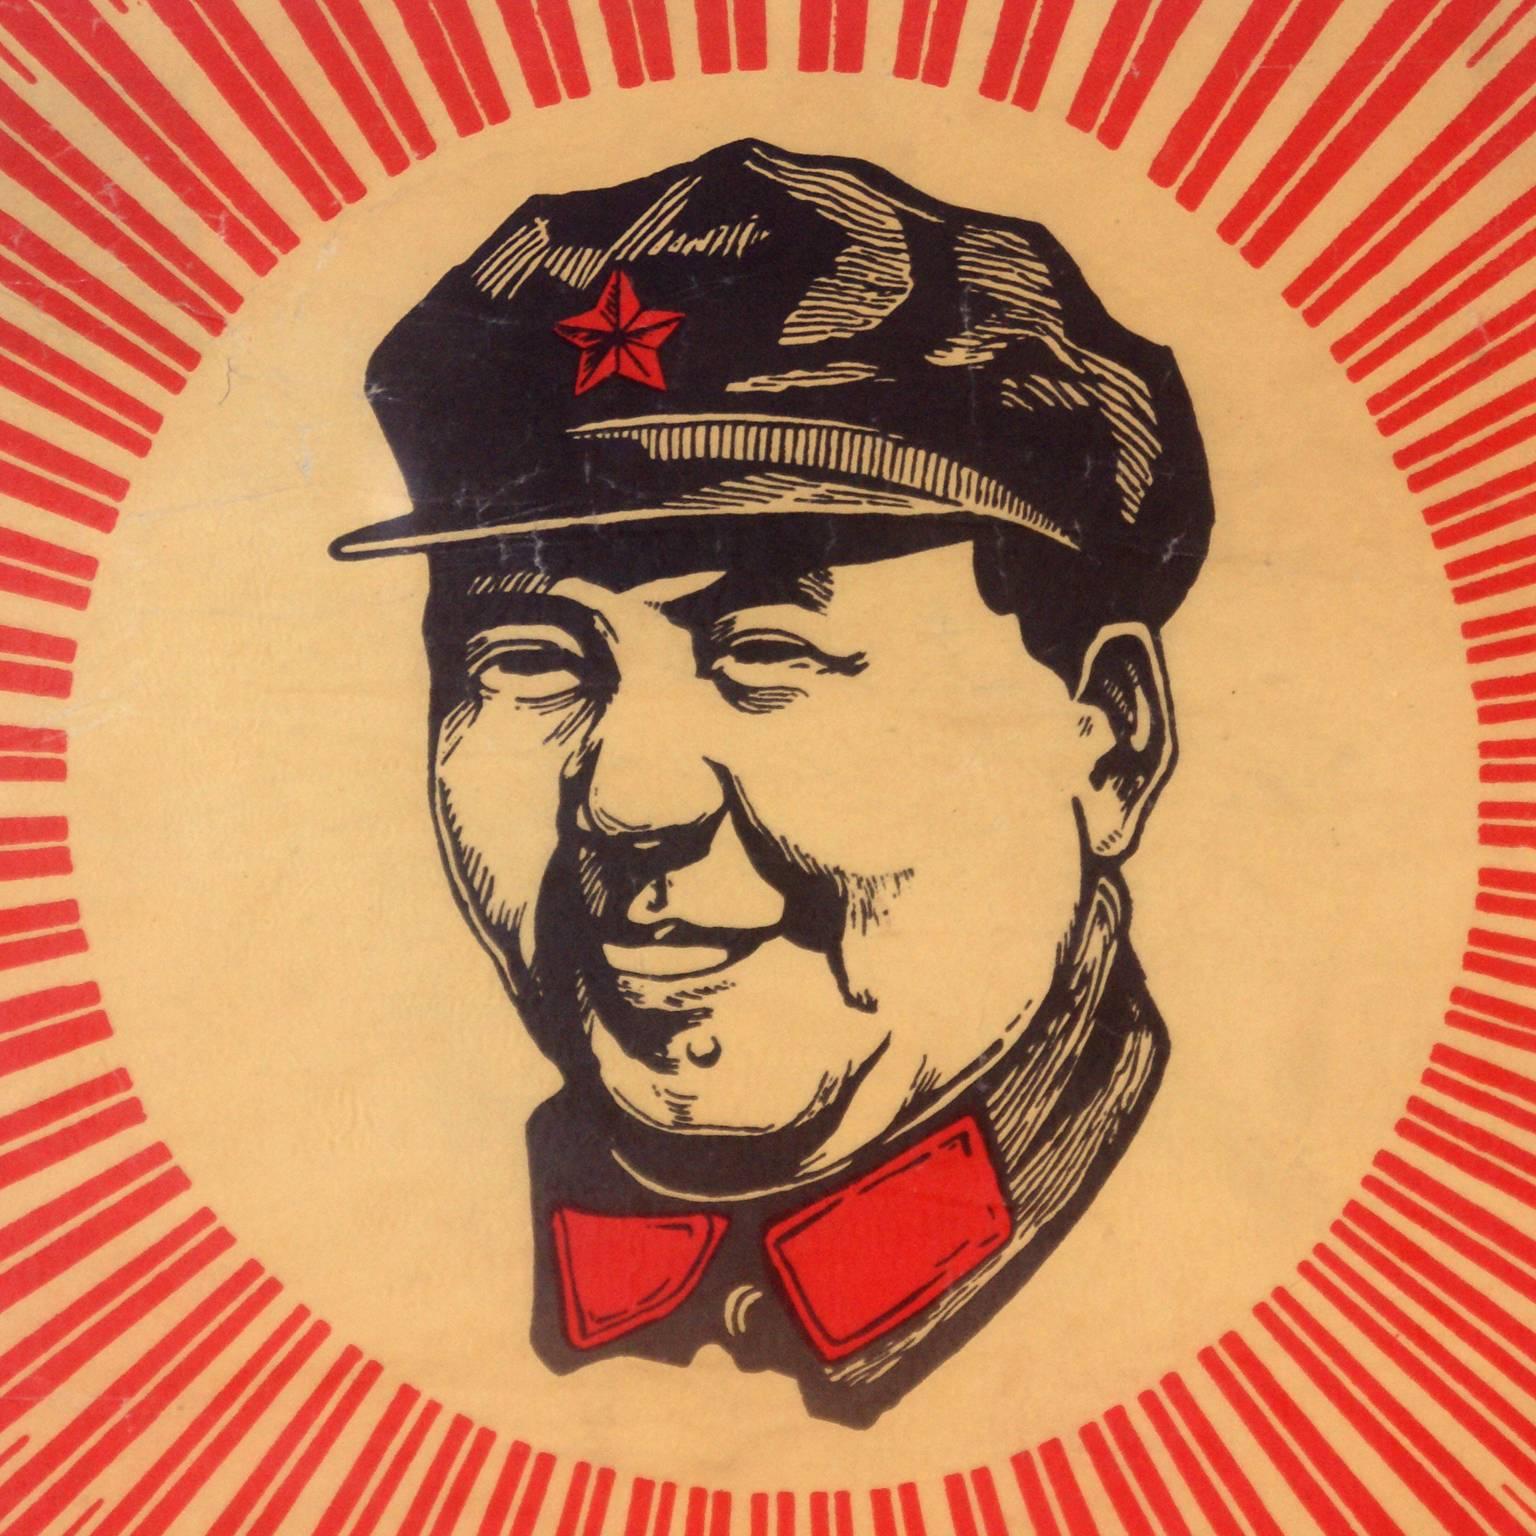 1960s Chinese propaganda poster featuring a standing writing a political slogan. The phrase running across the bottom of the poster translates as “The 1947 Presedent Guiding the Nation Forward”
black and red print on rough paper. The item is